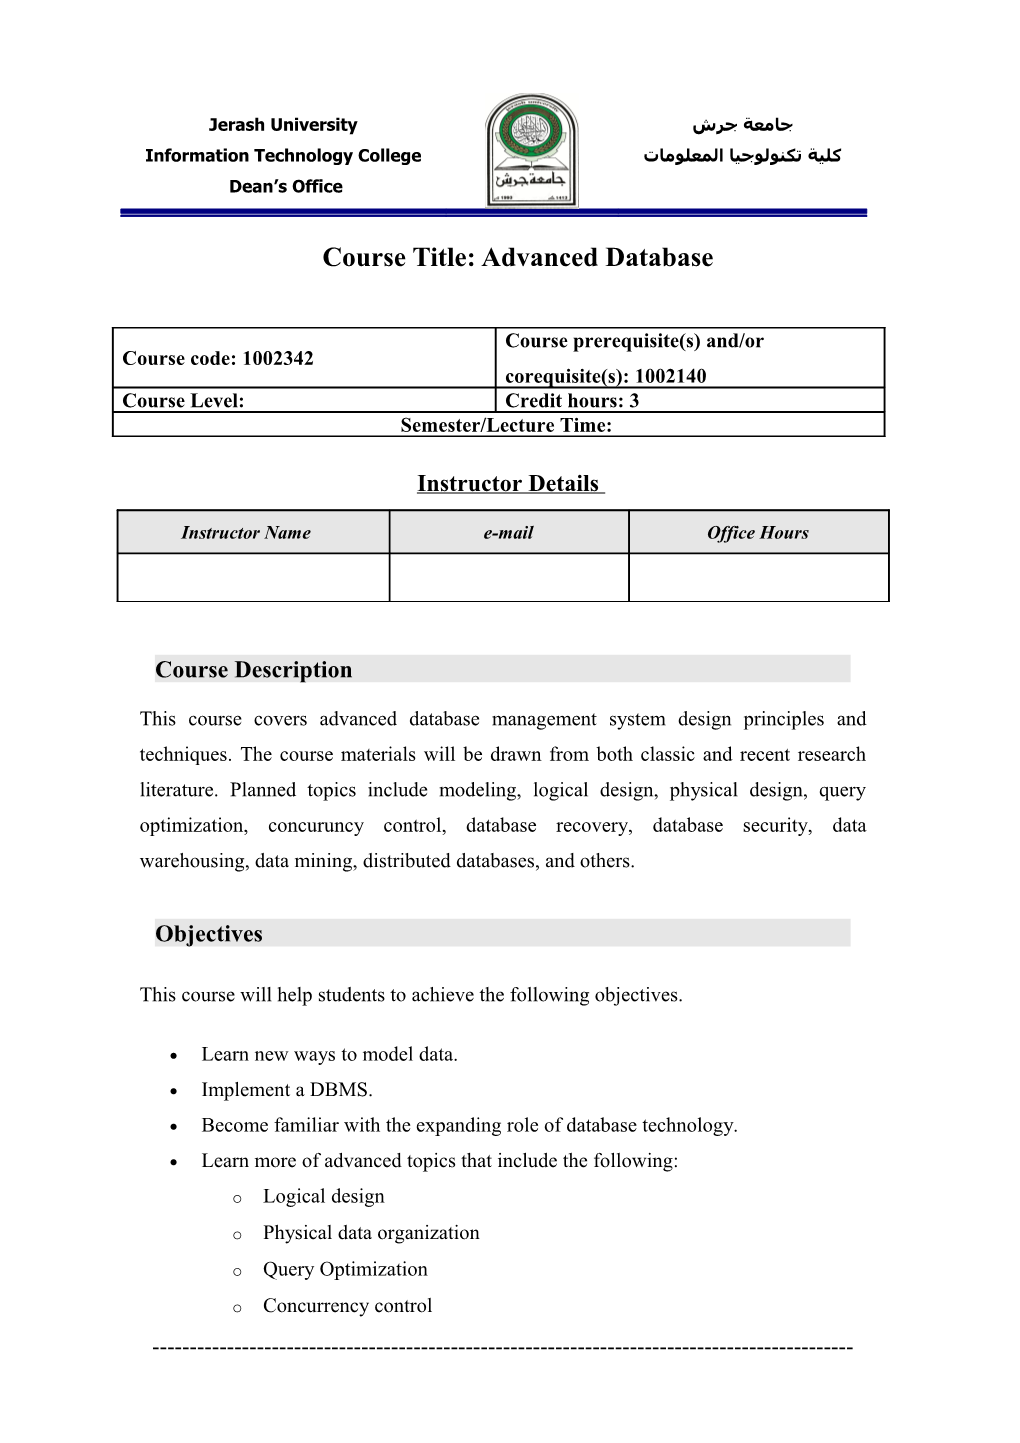 Course Title:Advanced Database